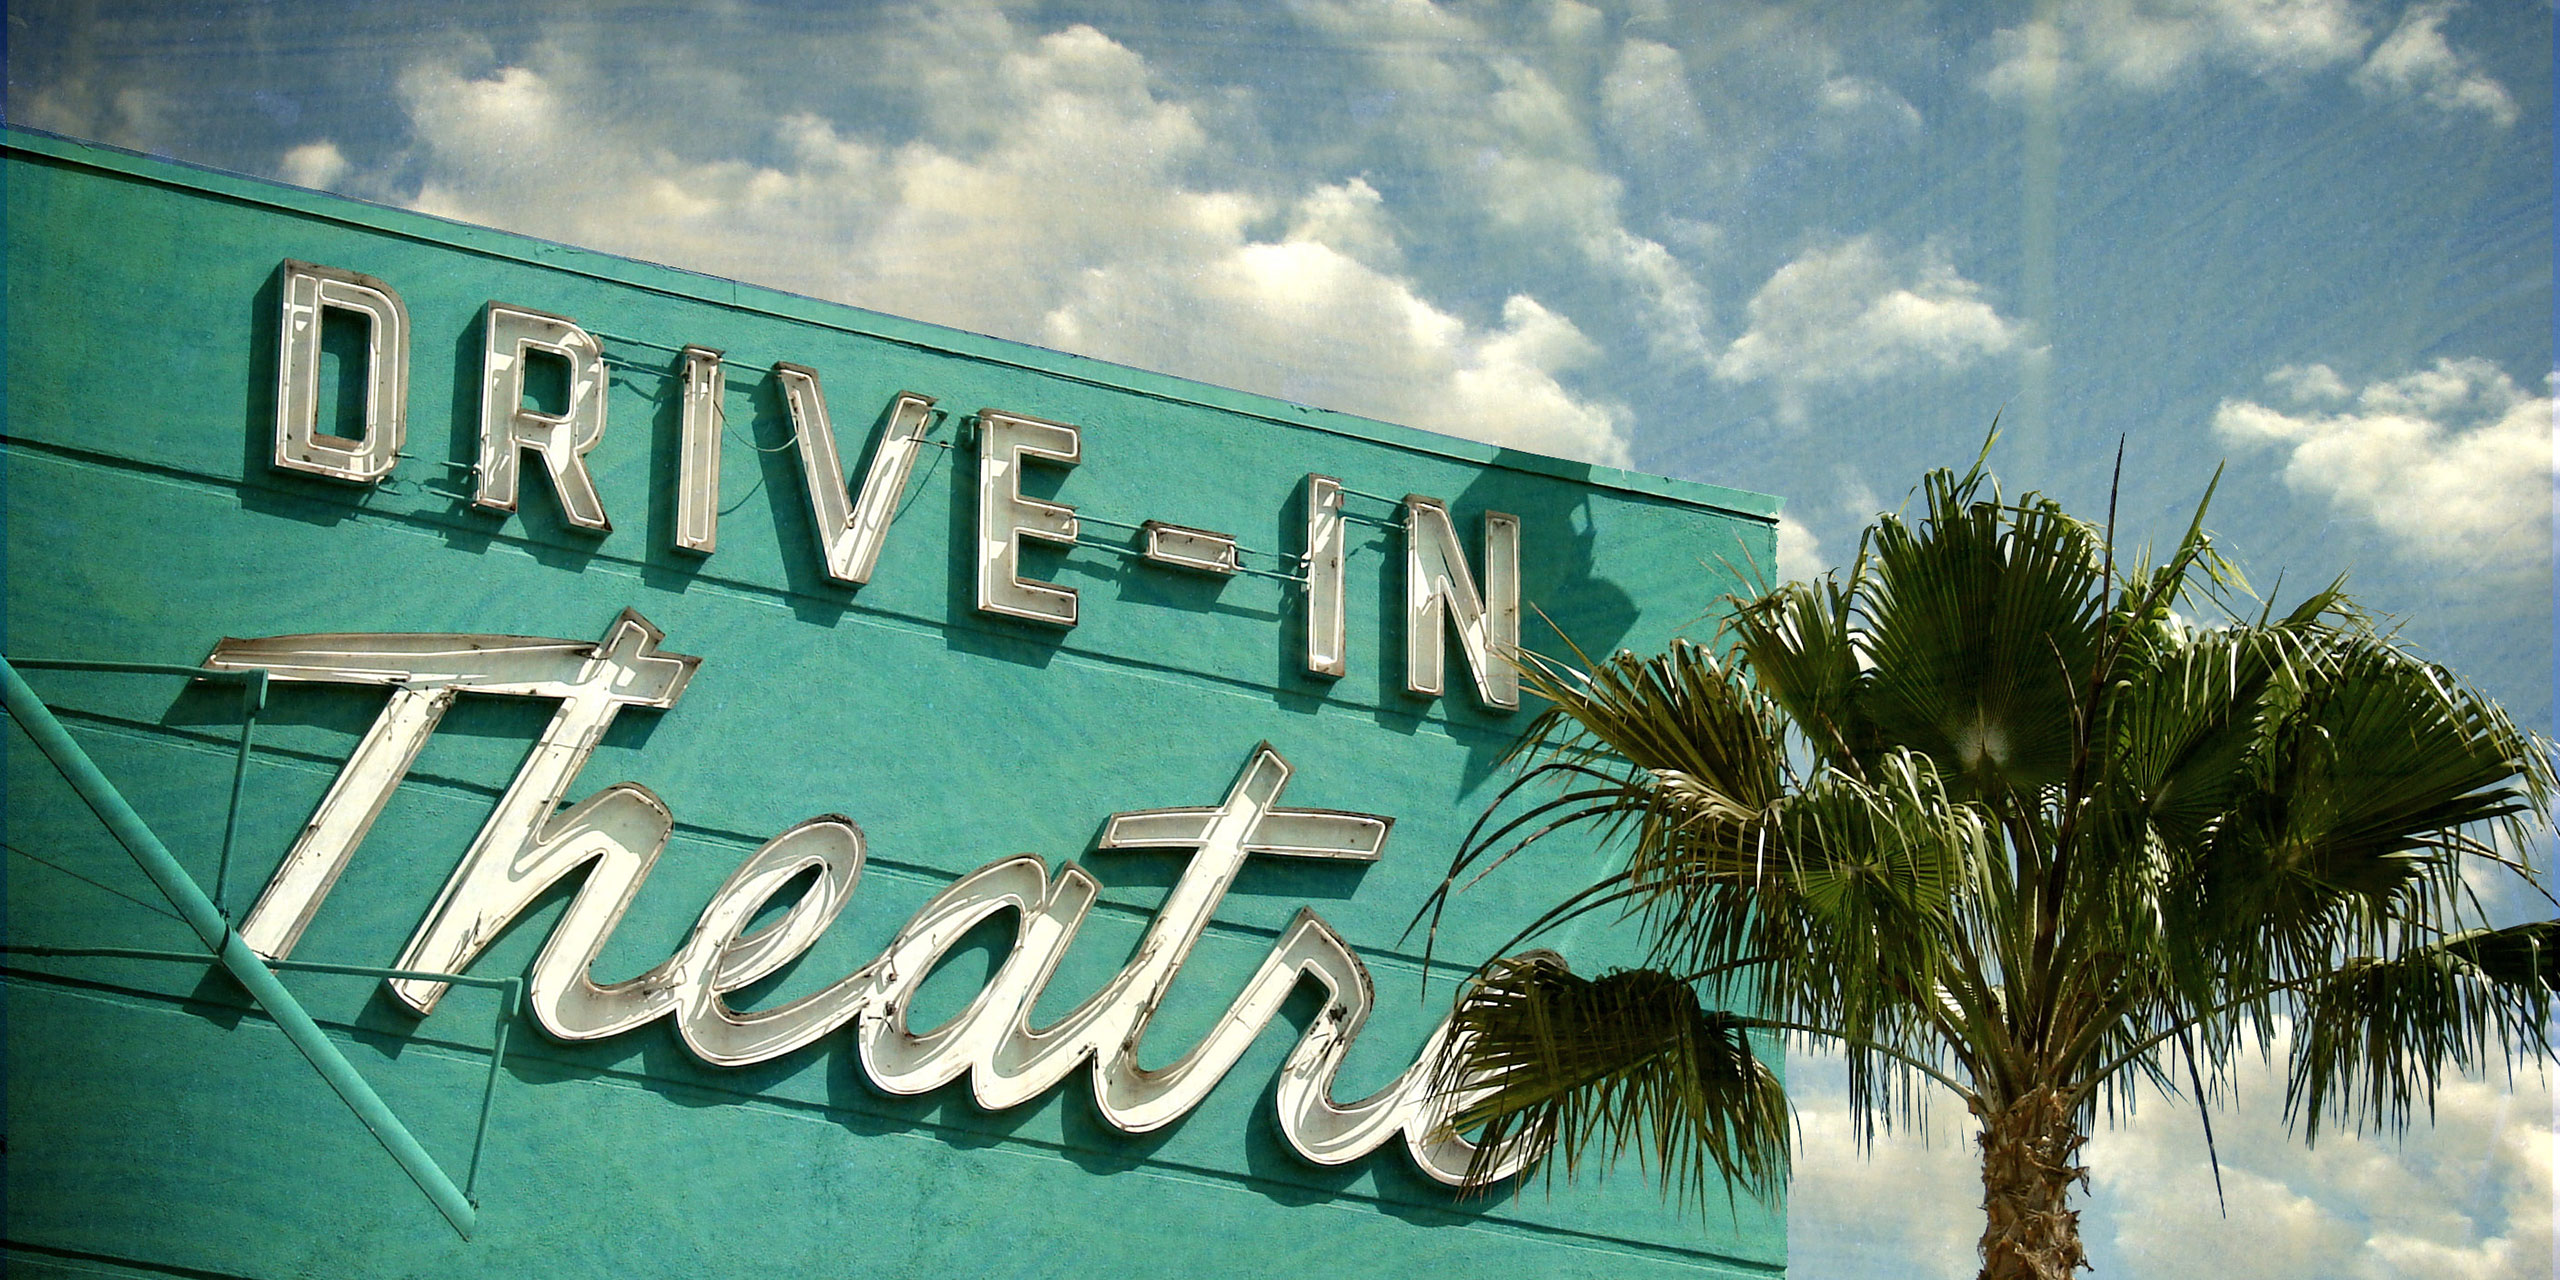 Drive-In Movie Theater Sign; Courtesy of J.D.S/Shutterstock.com